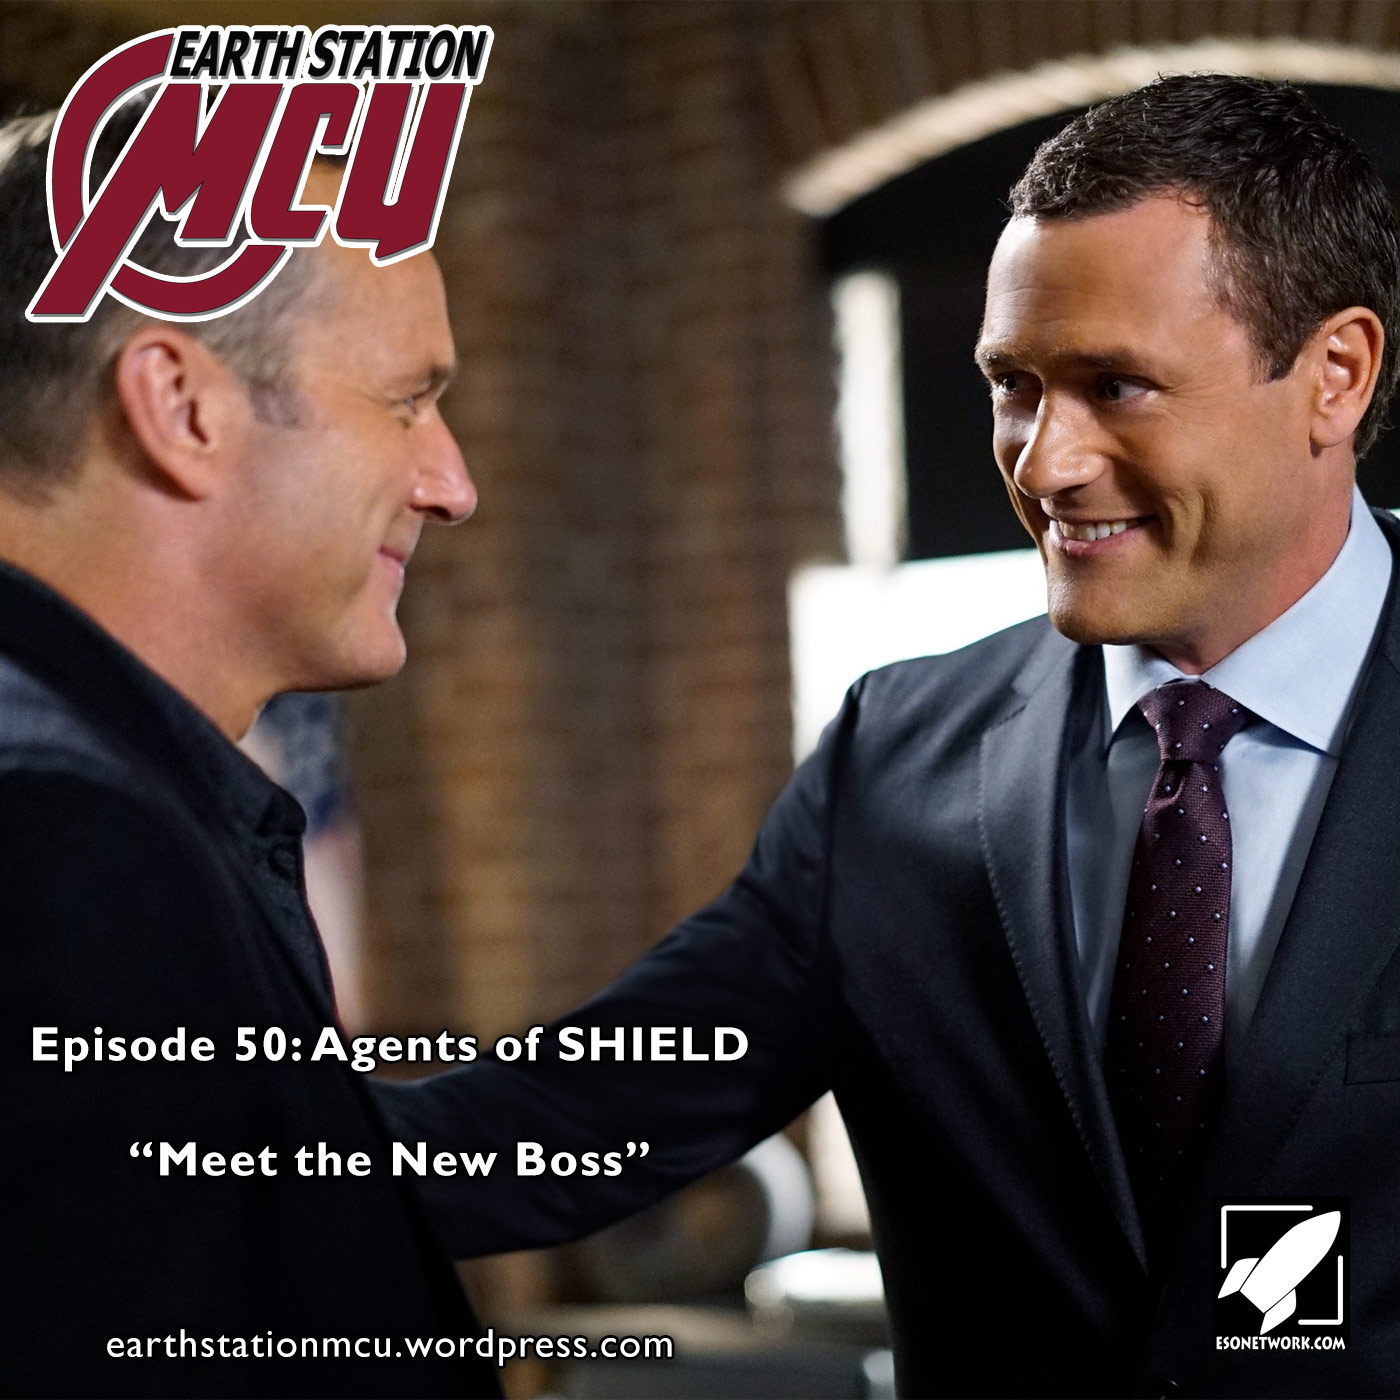 Earth Station MCU Episode 50: Agents of SHIELD ”Meet the New Boss”